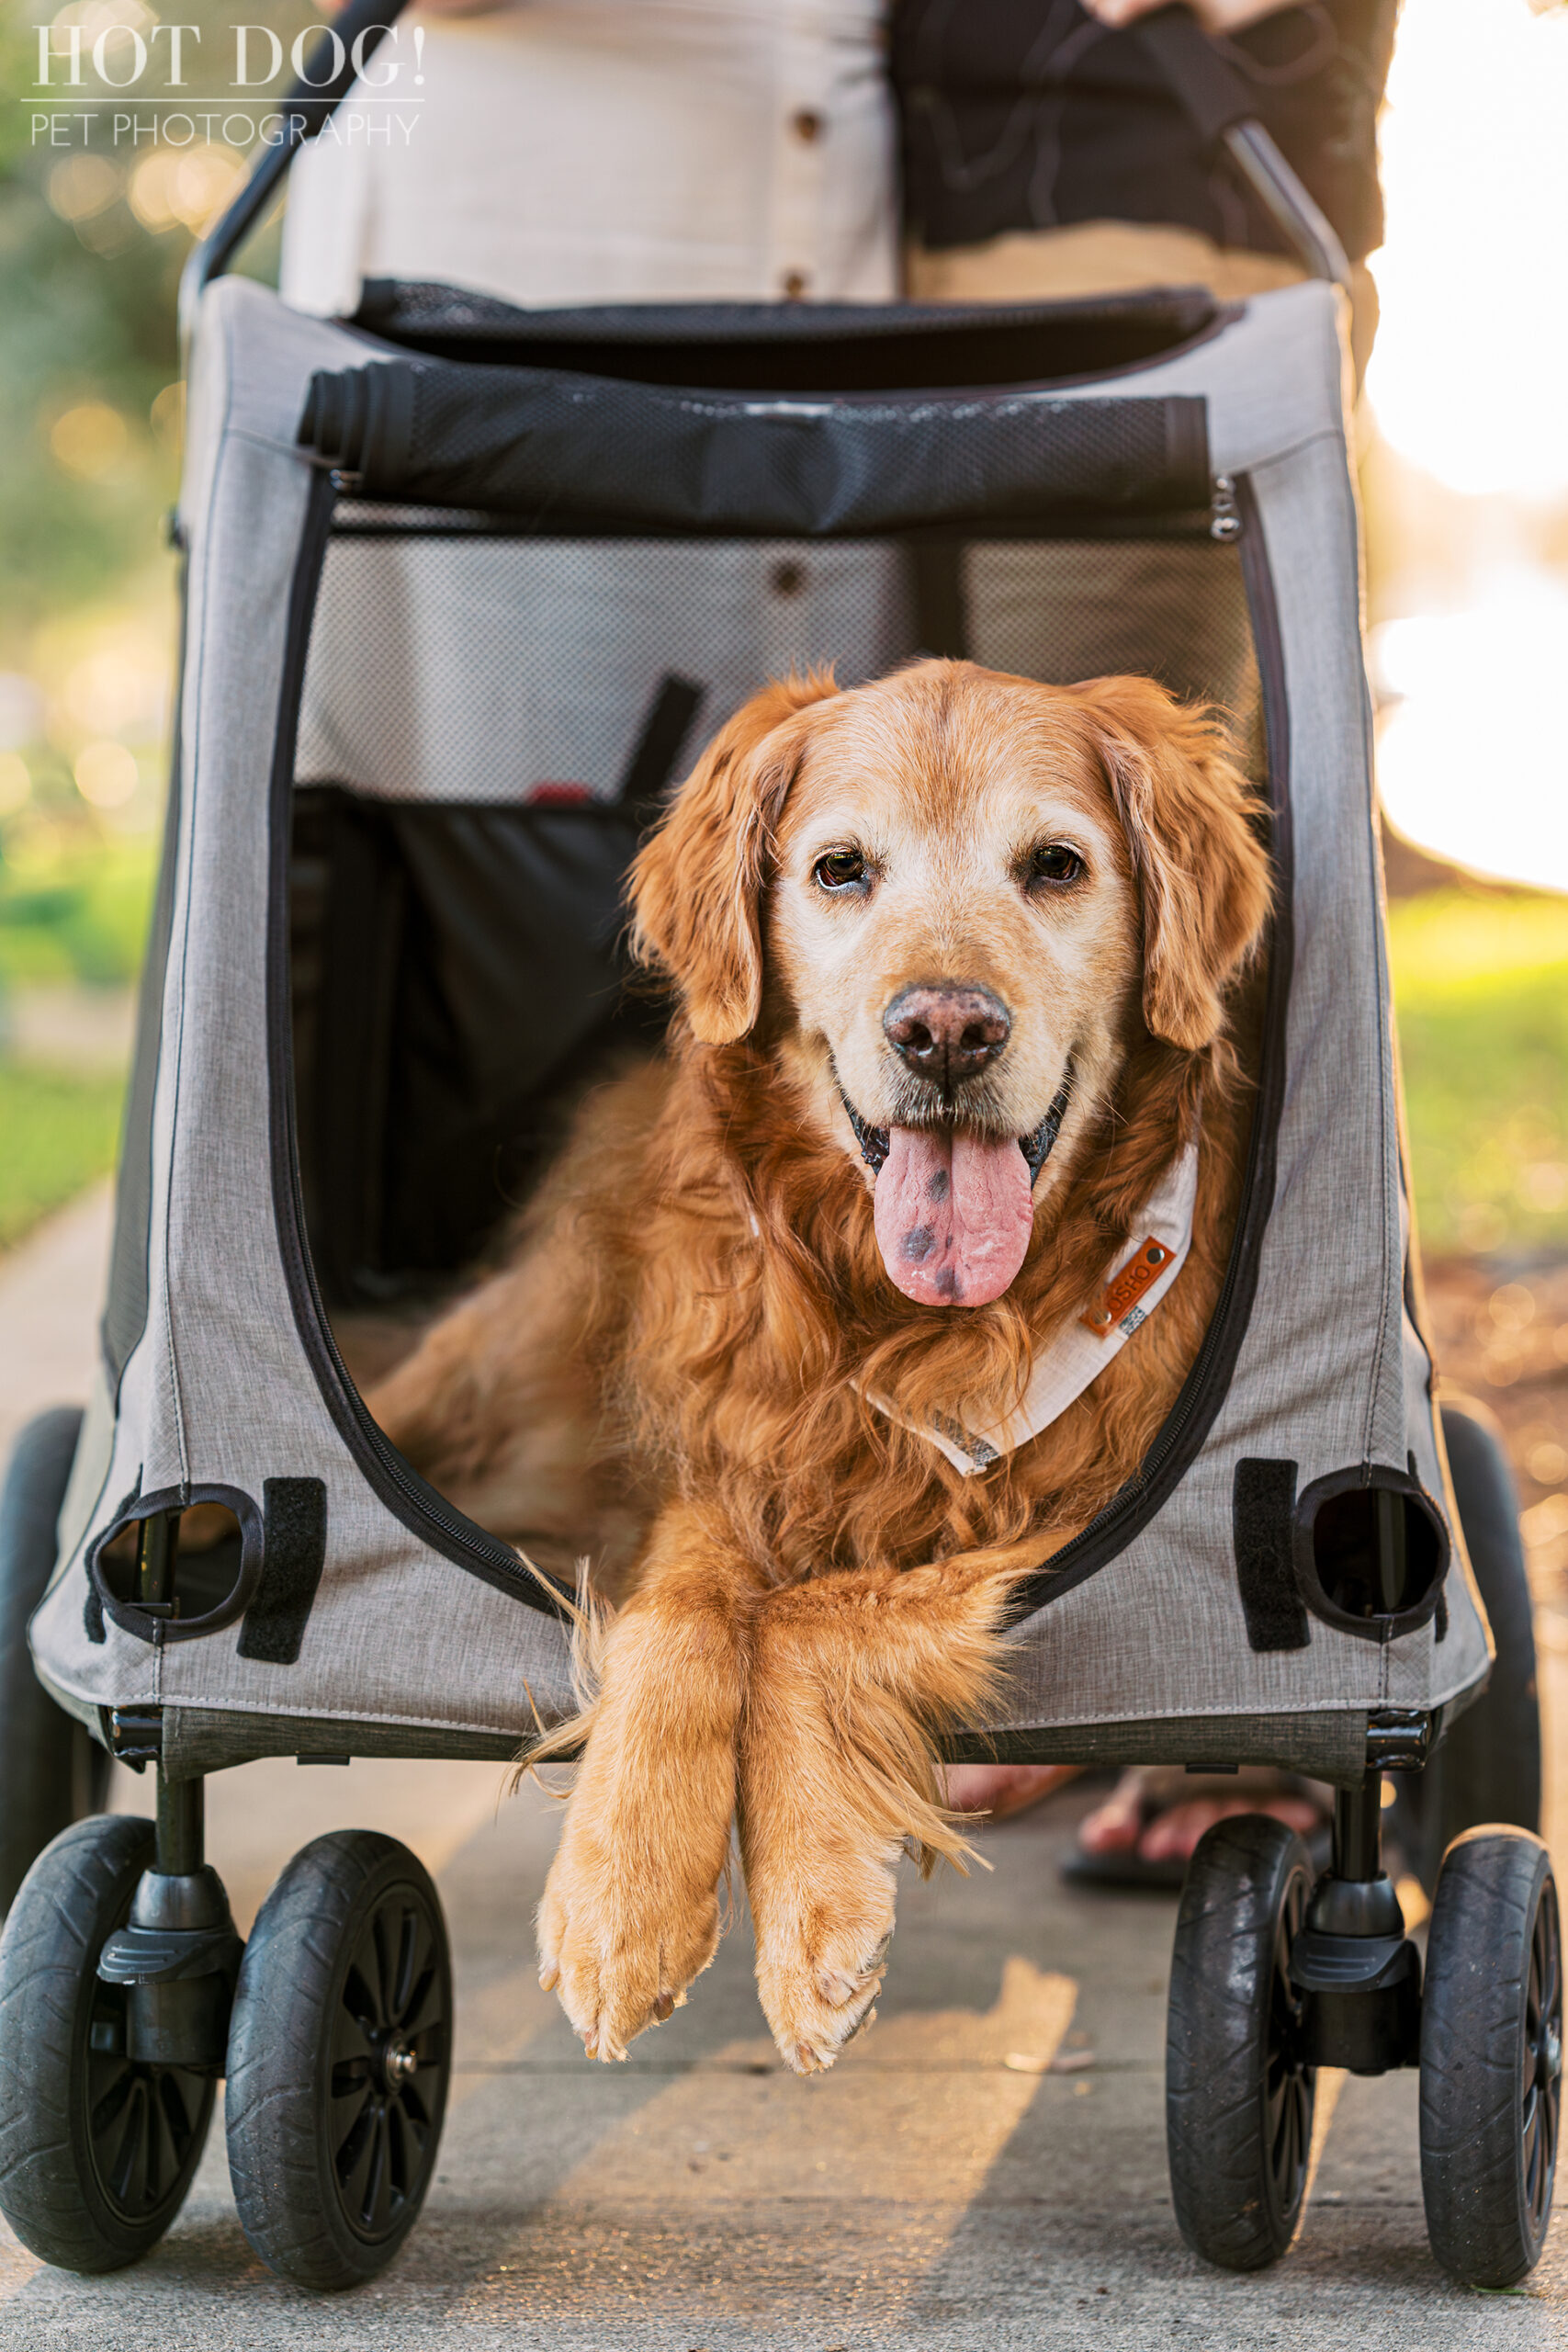 Paws on the Pavement: Osho, the senior golden retriever, explores the streets of Celebration, Florida, in his favorite doggy stroller. (Photo by Hot Dog! Pet Photography)